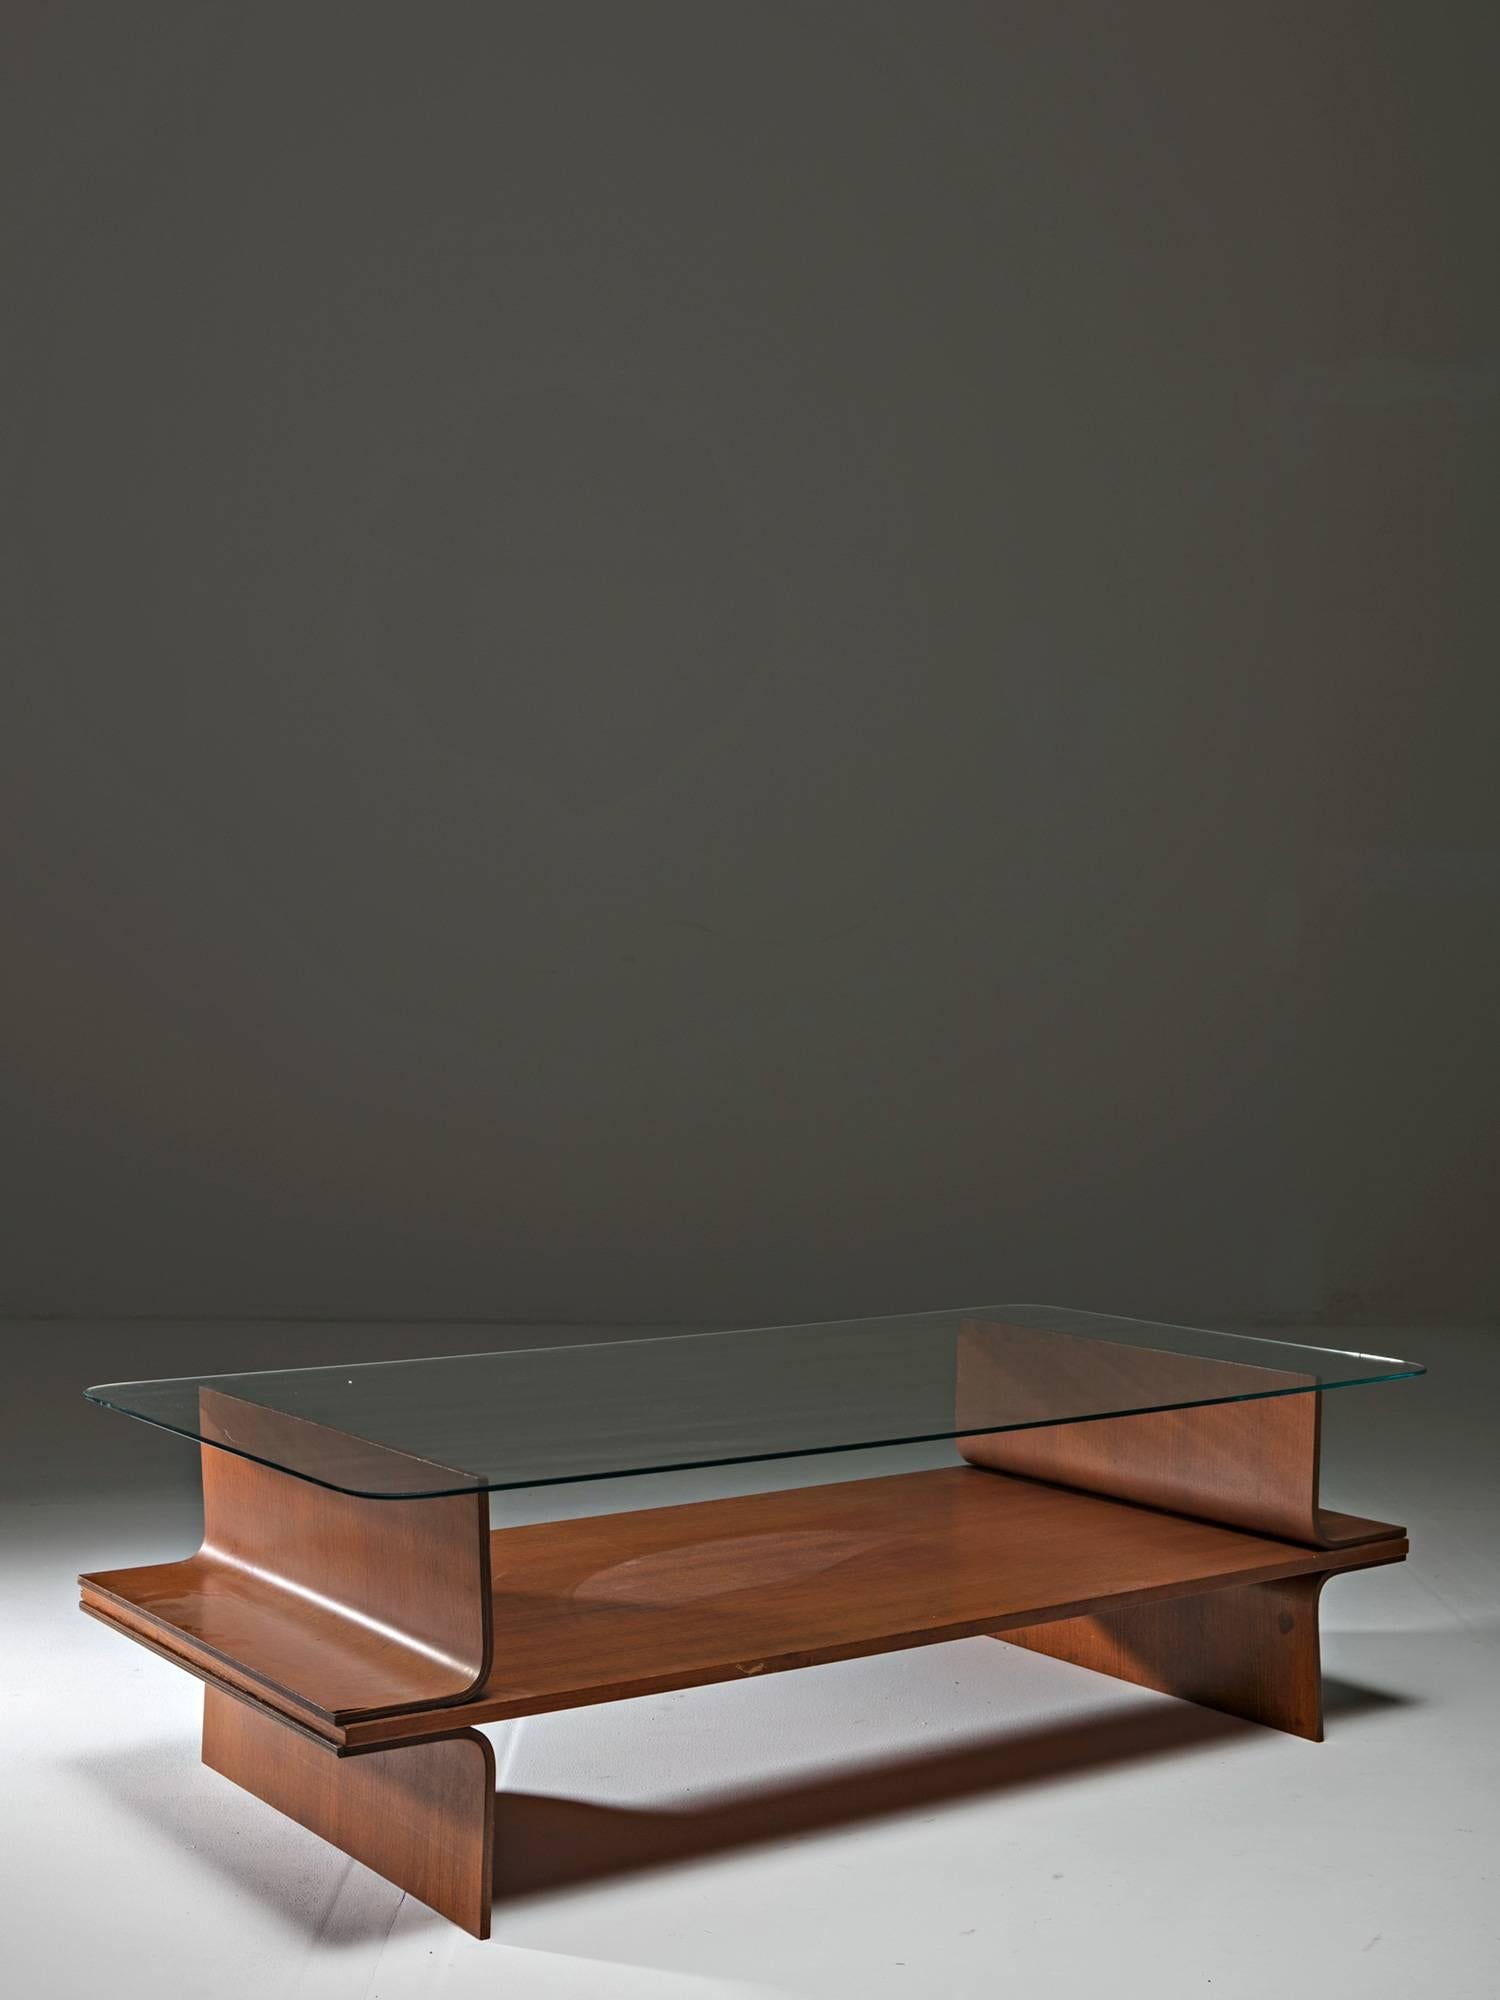 Remarkable low table manufactured by Cassina.
Few essential plywood elements compose the frame of the table.